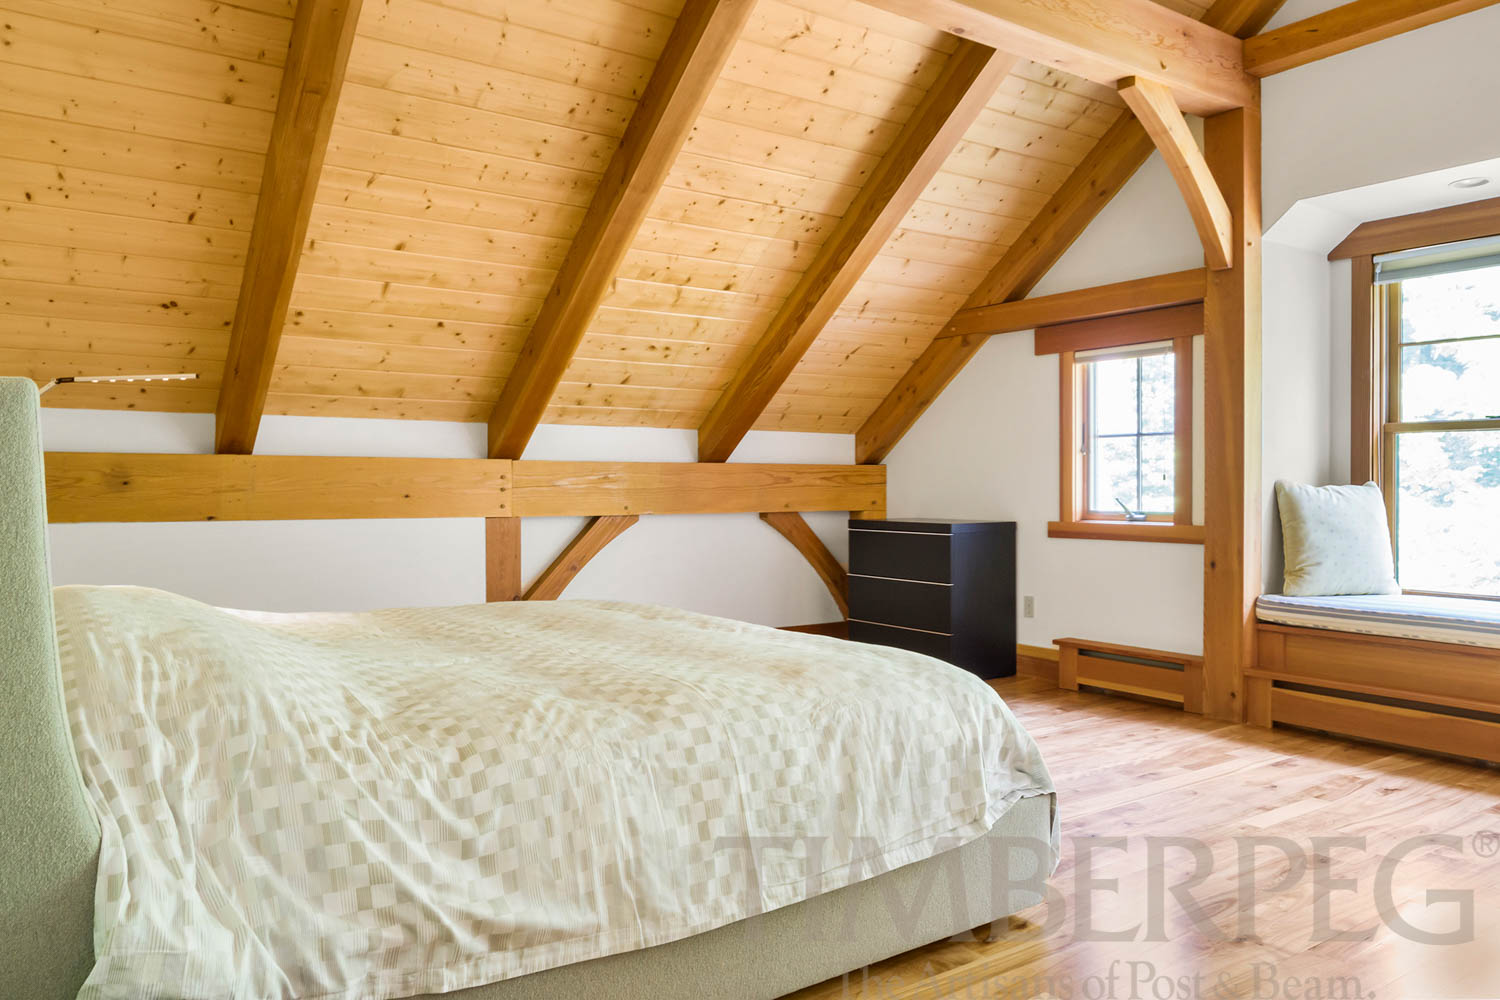 High Ridge, NH (5624) bedroom with window seat and timber frame